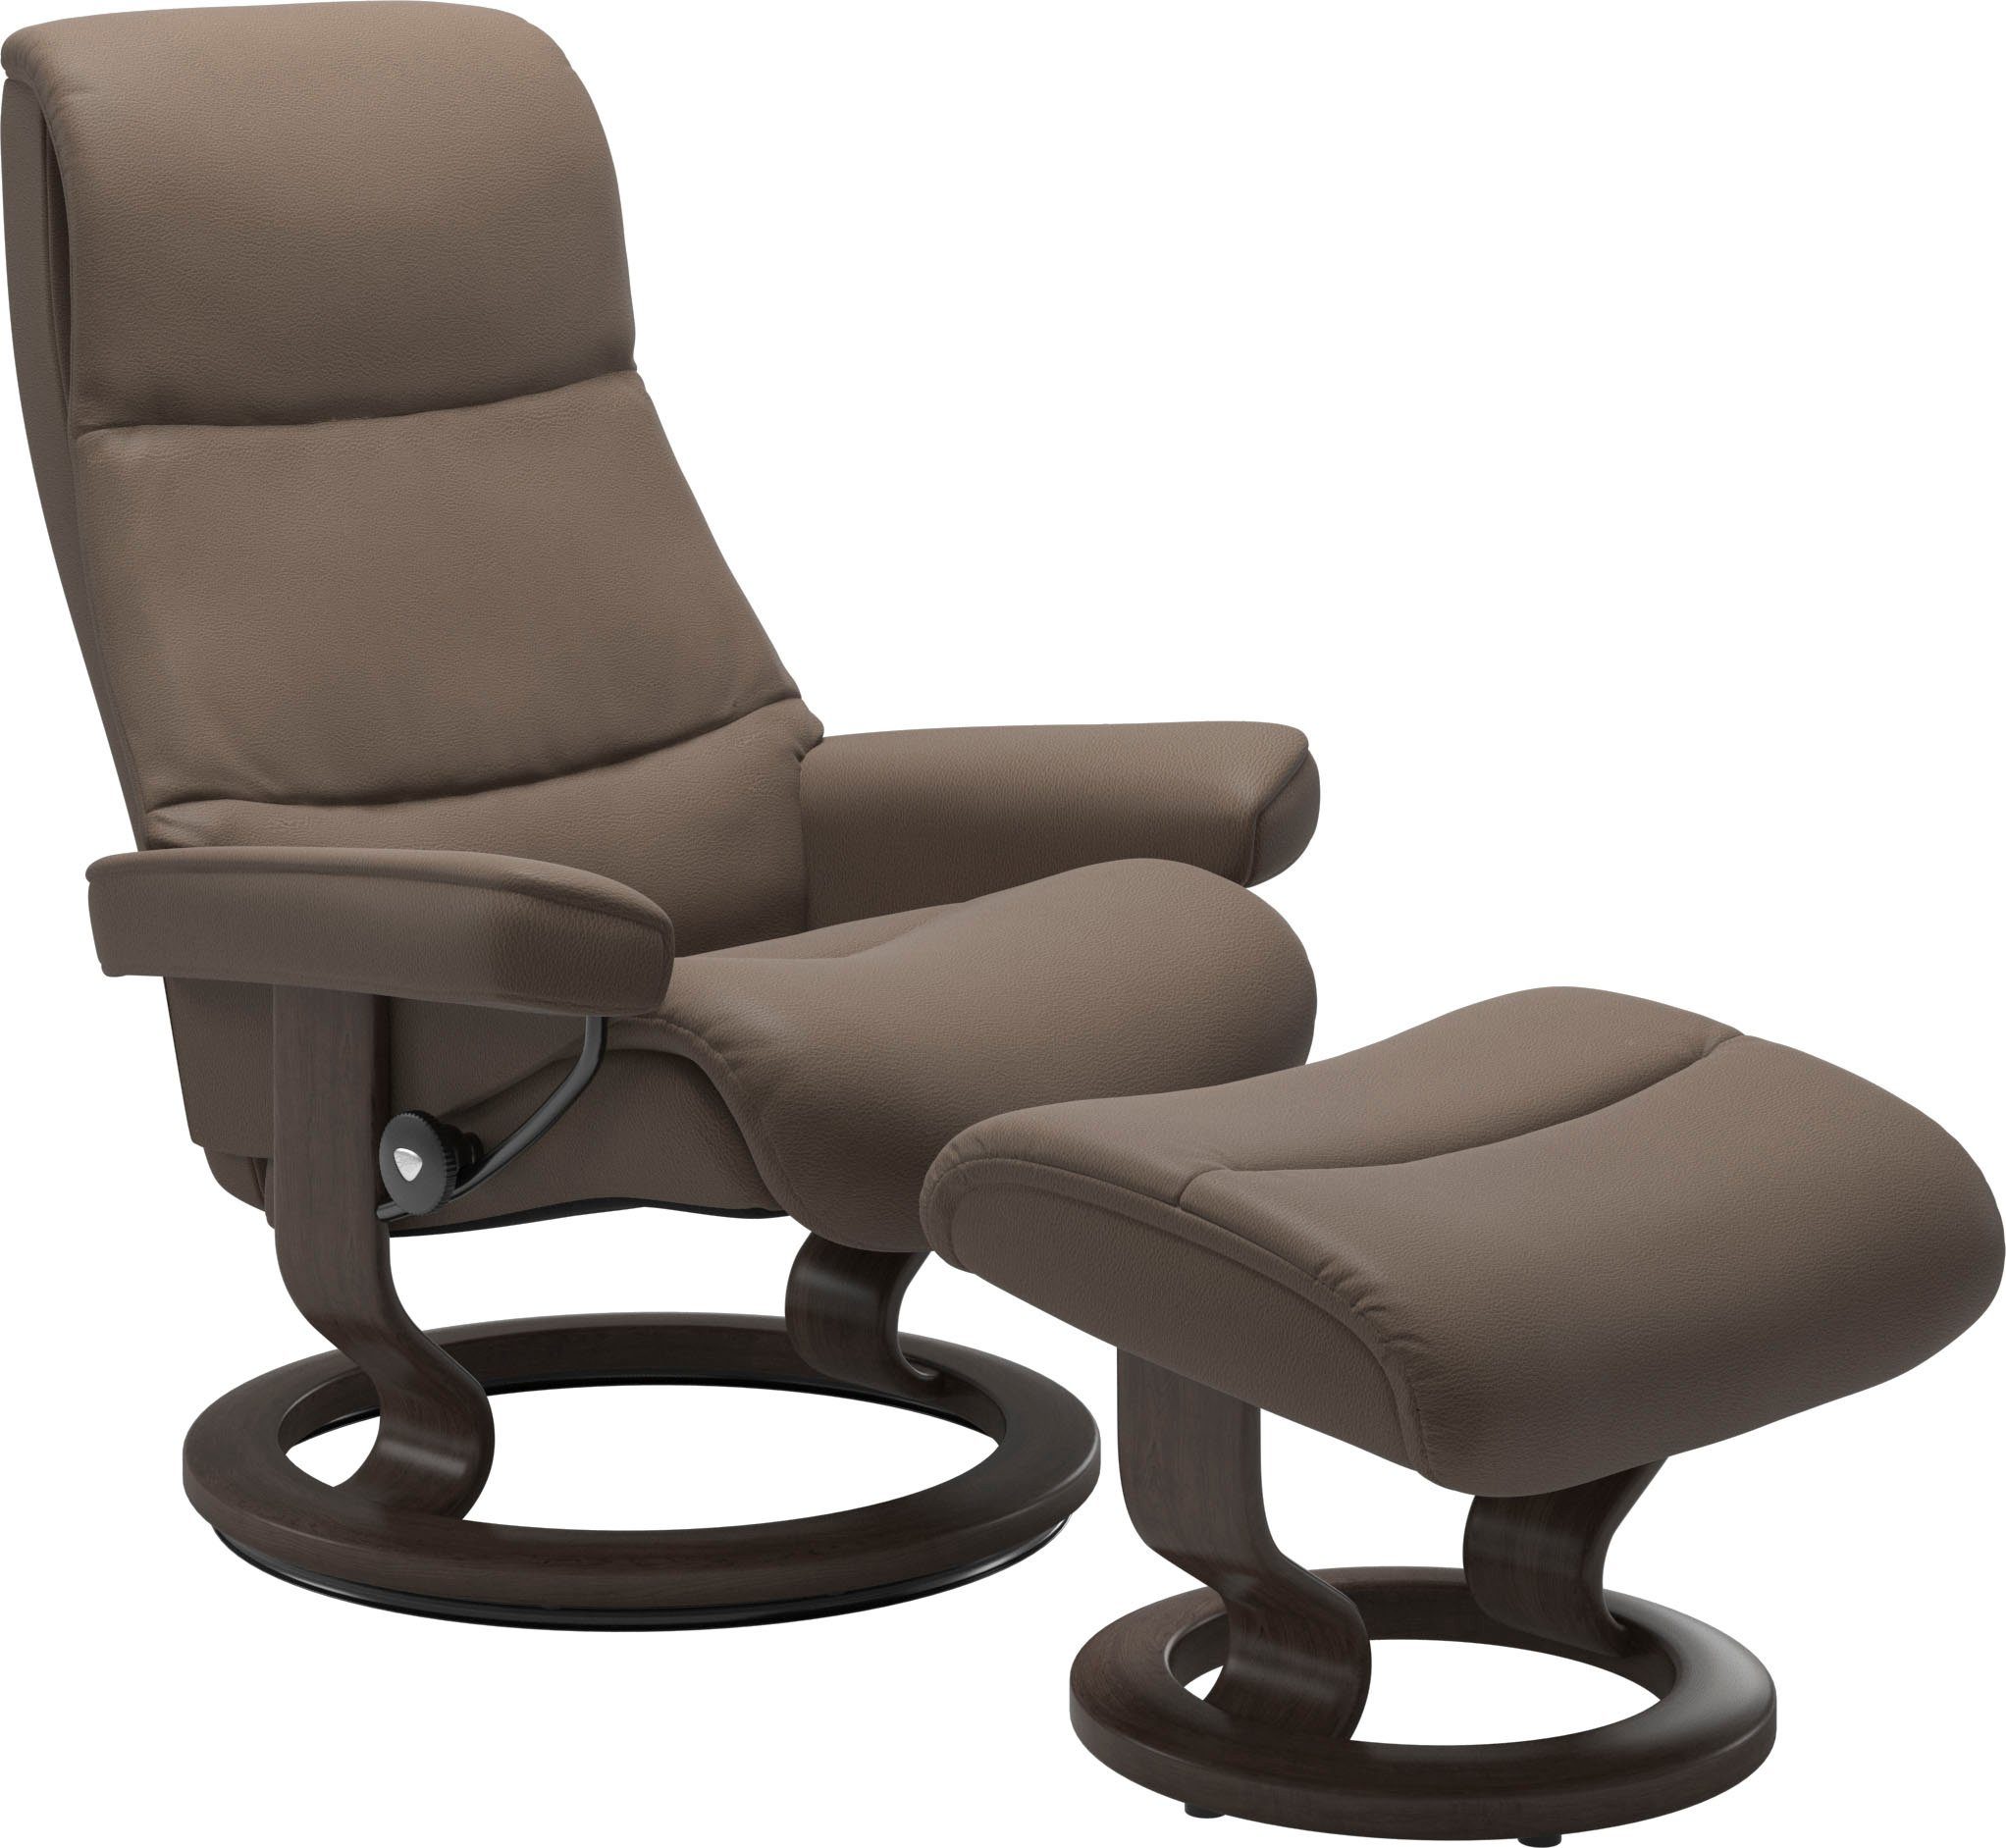 Base, M,Gestell View, Classic mit Relaxsessel Wenge Größe Stressless®